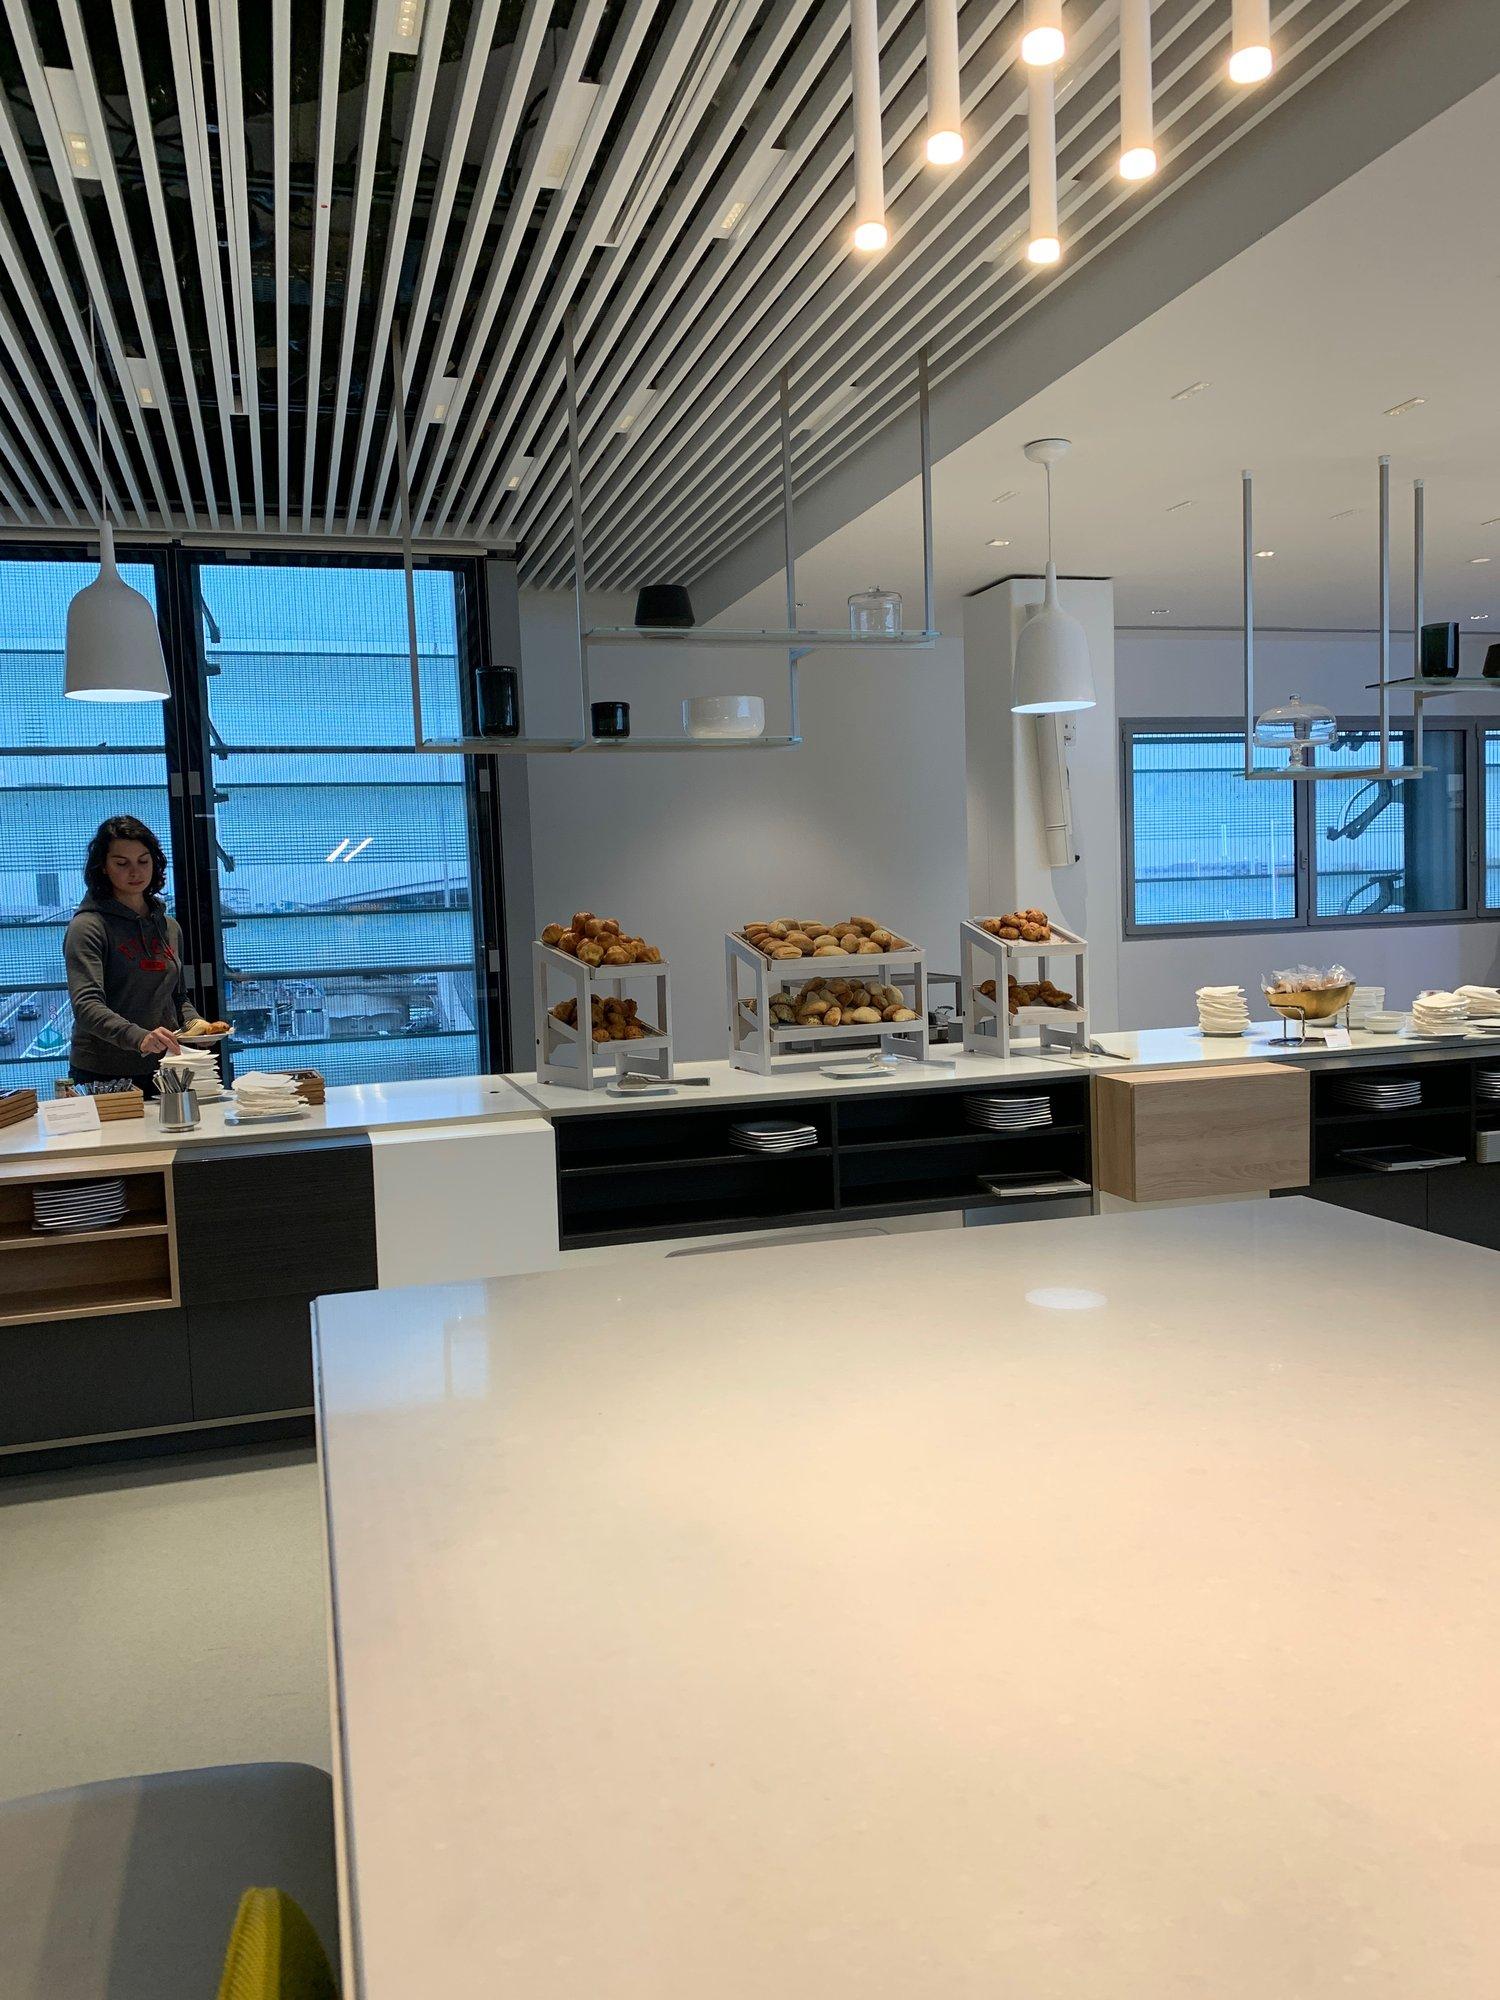 Air France Lounge (Concourse M) image 16 of 17